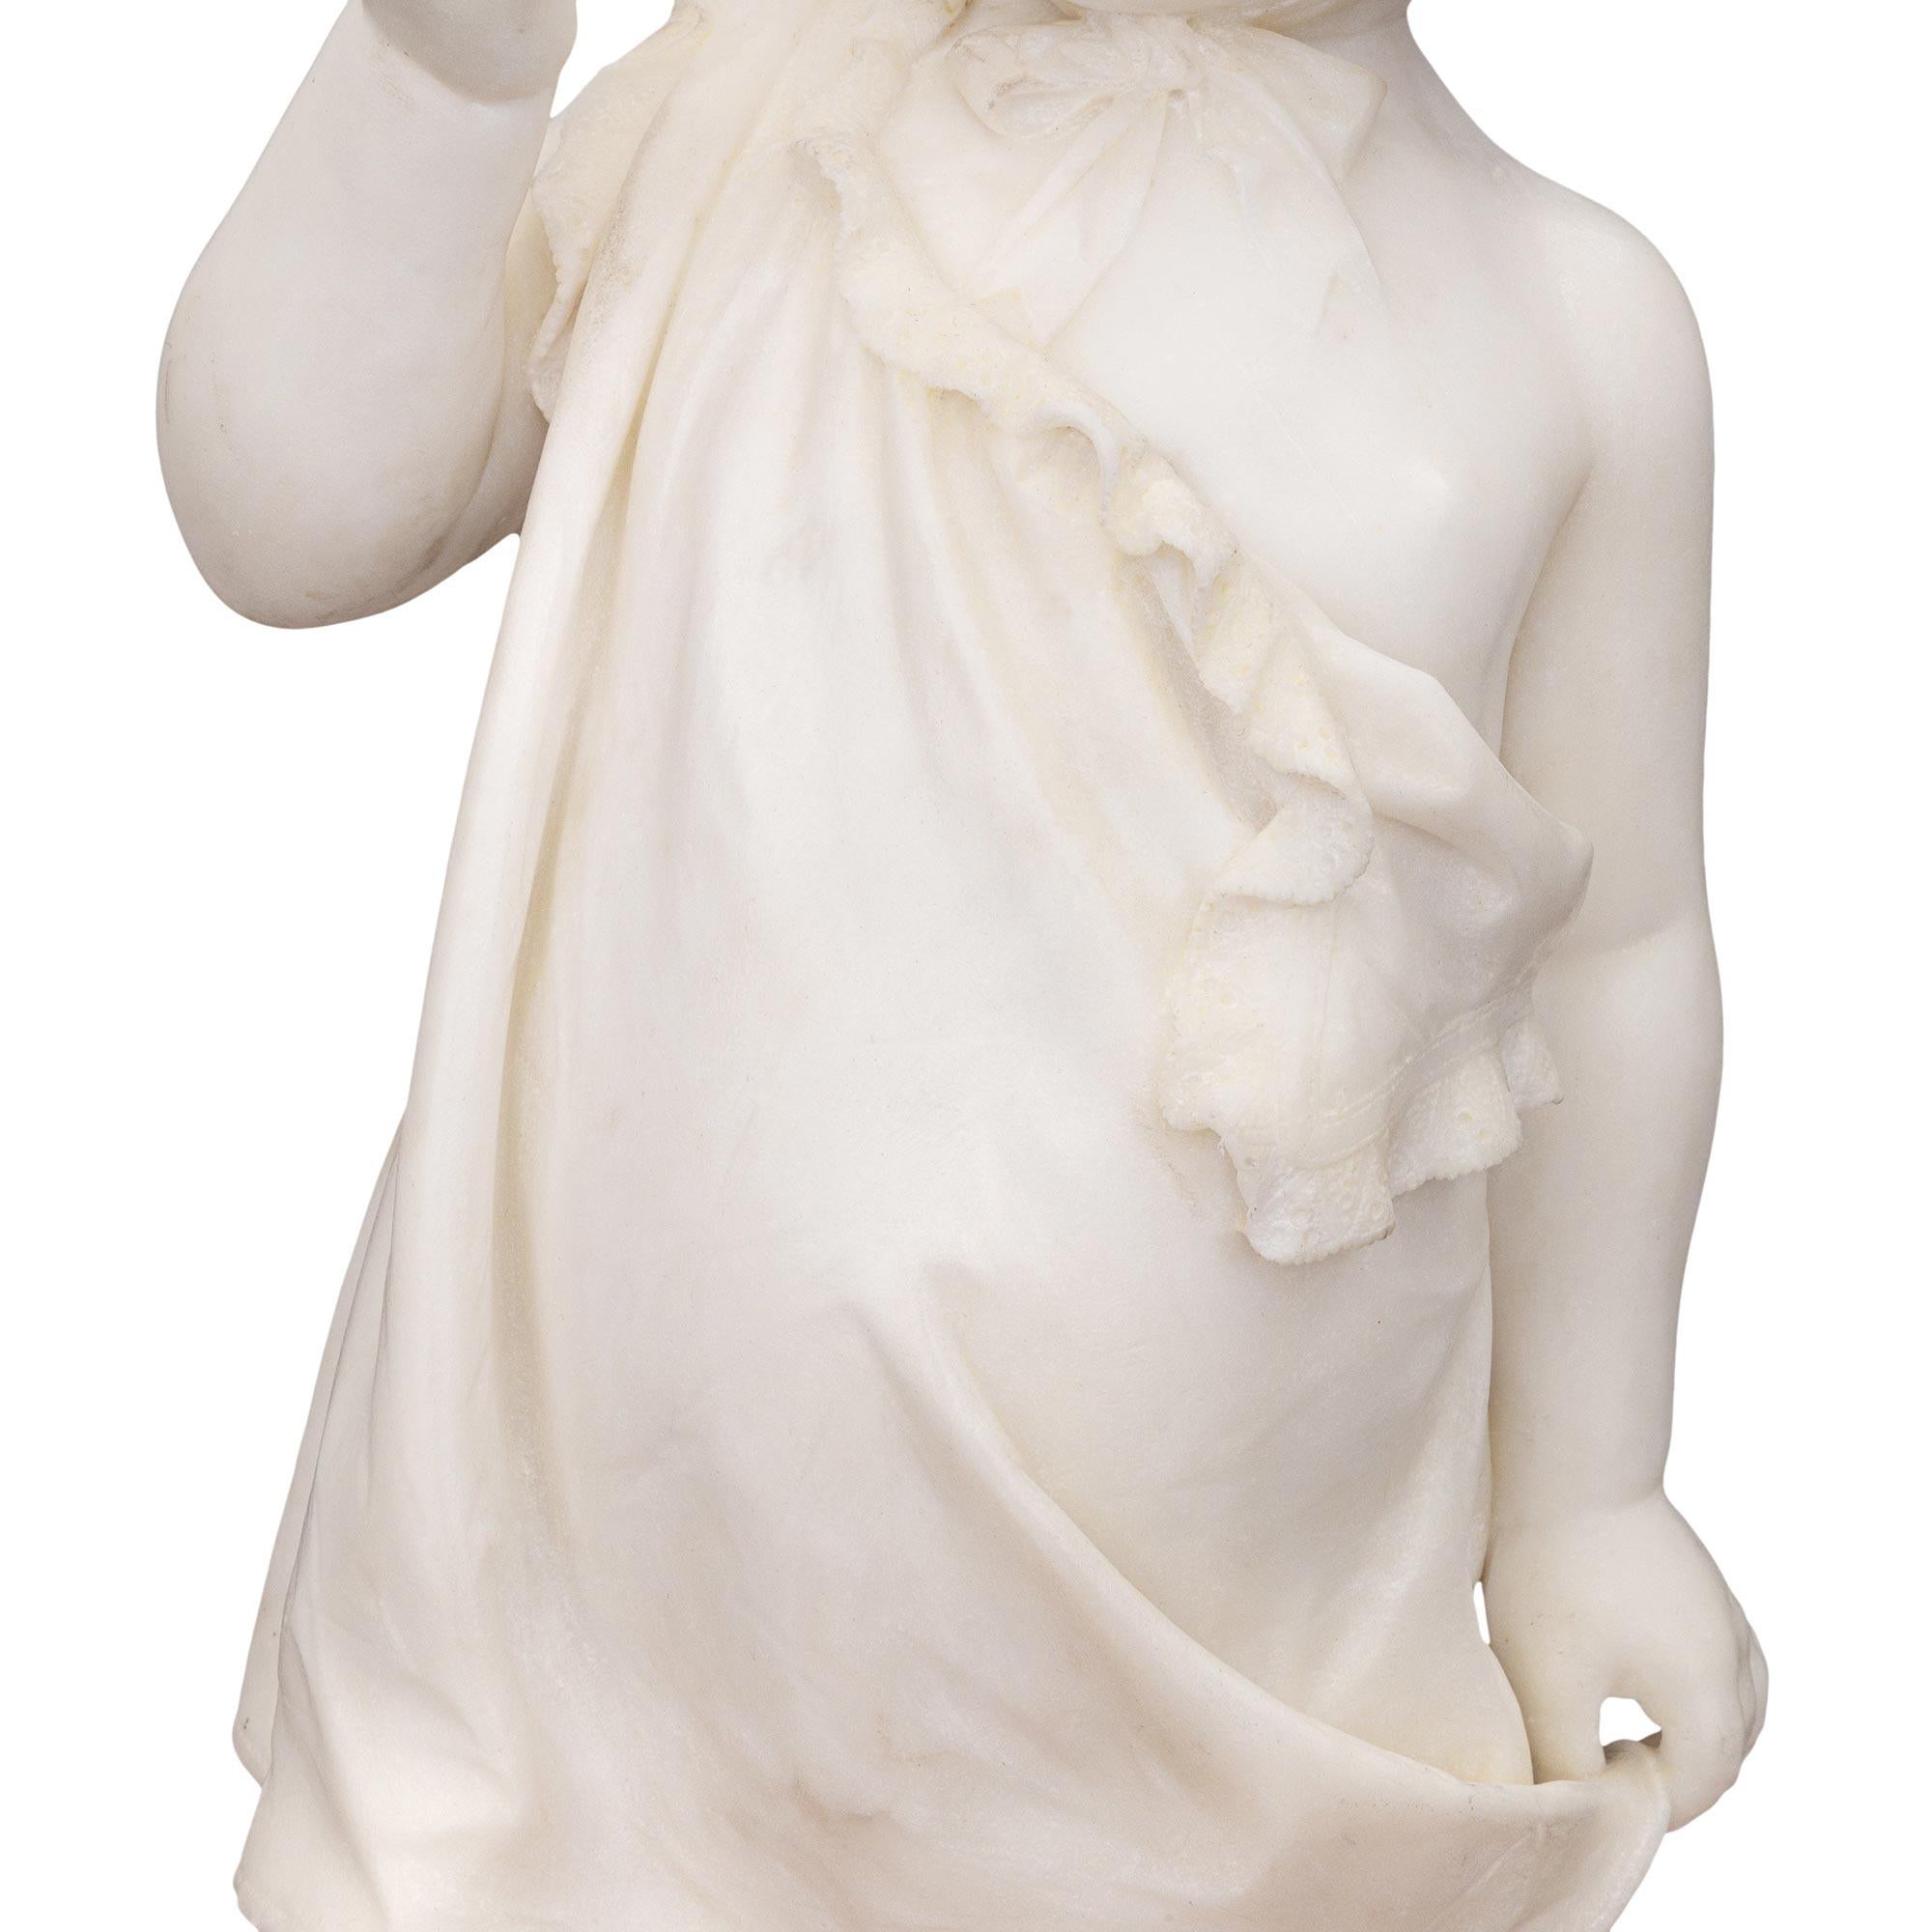 Italian 19th Century White Carrara Marble Statue of a Young Girl For Sale 3